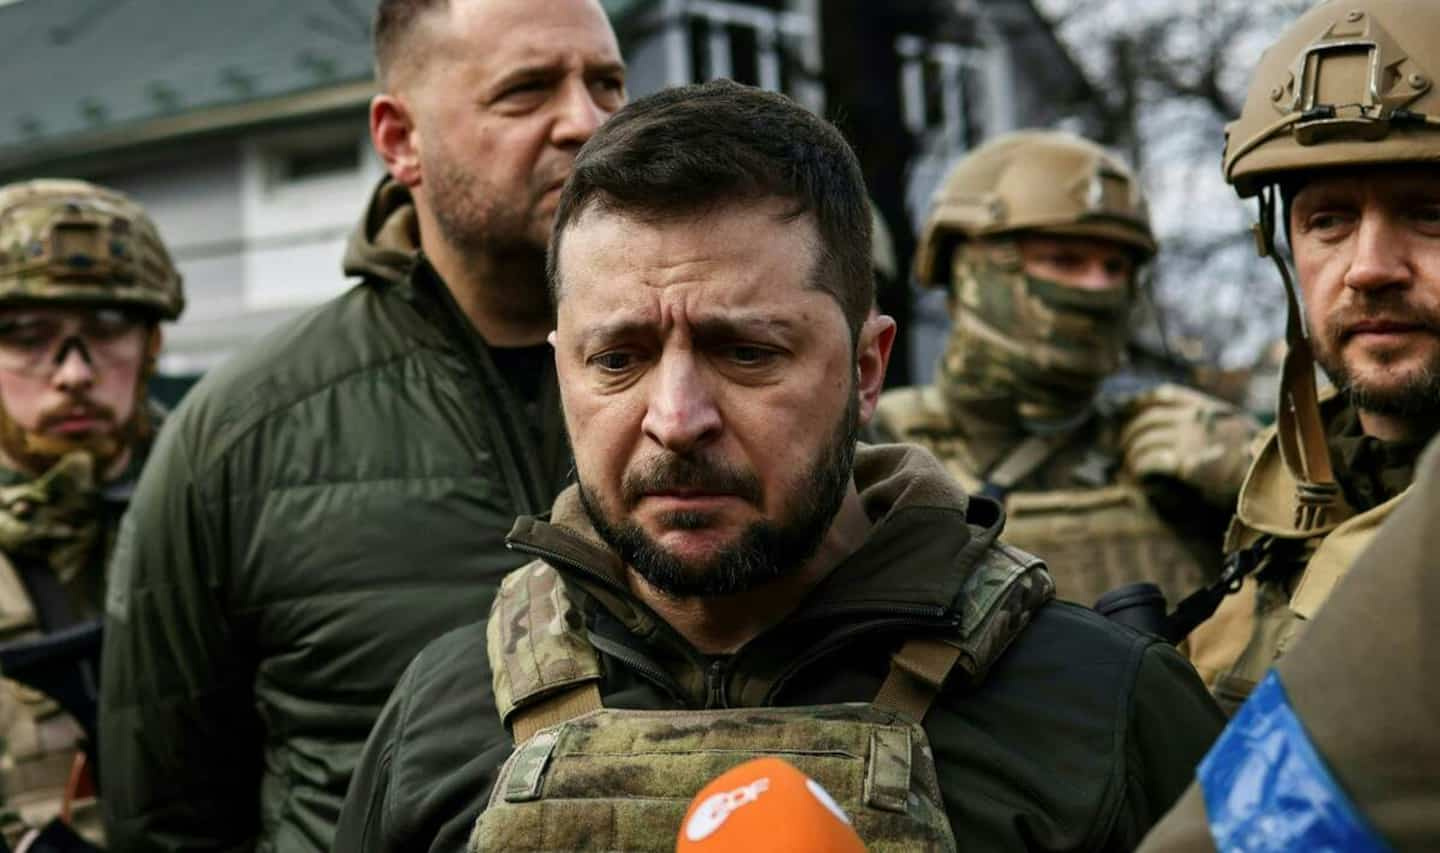 Ukraine loses between 60 and 100 soldiers a day, according to Zelensky